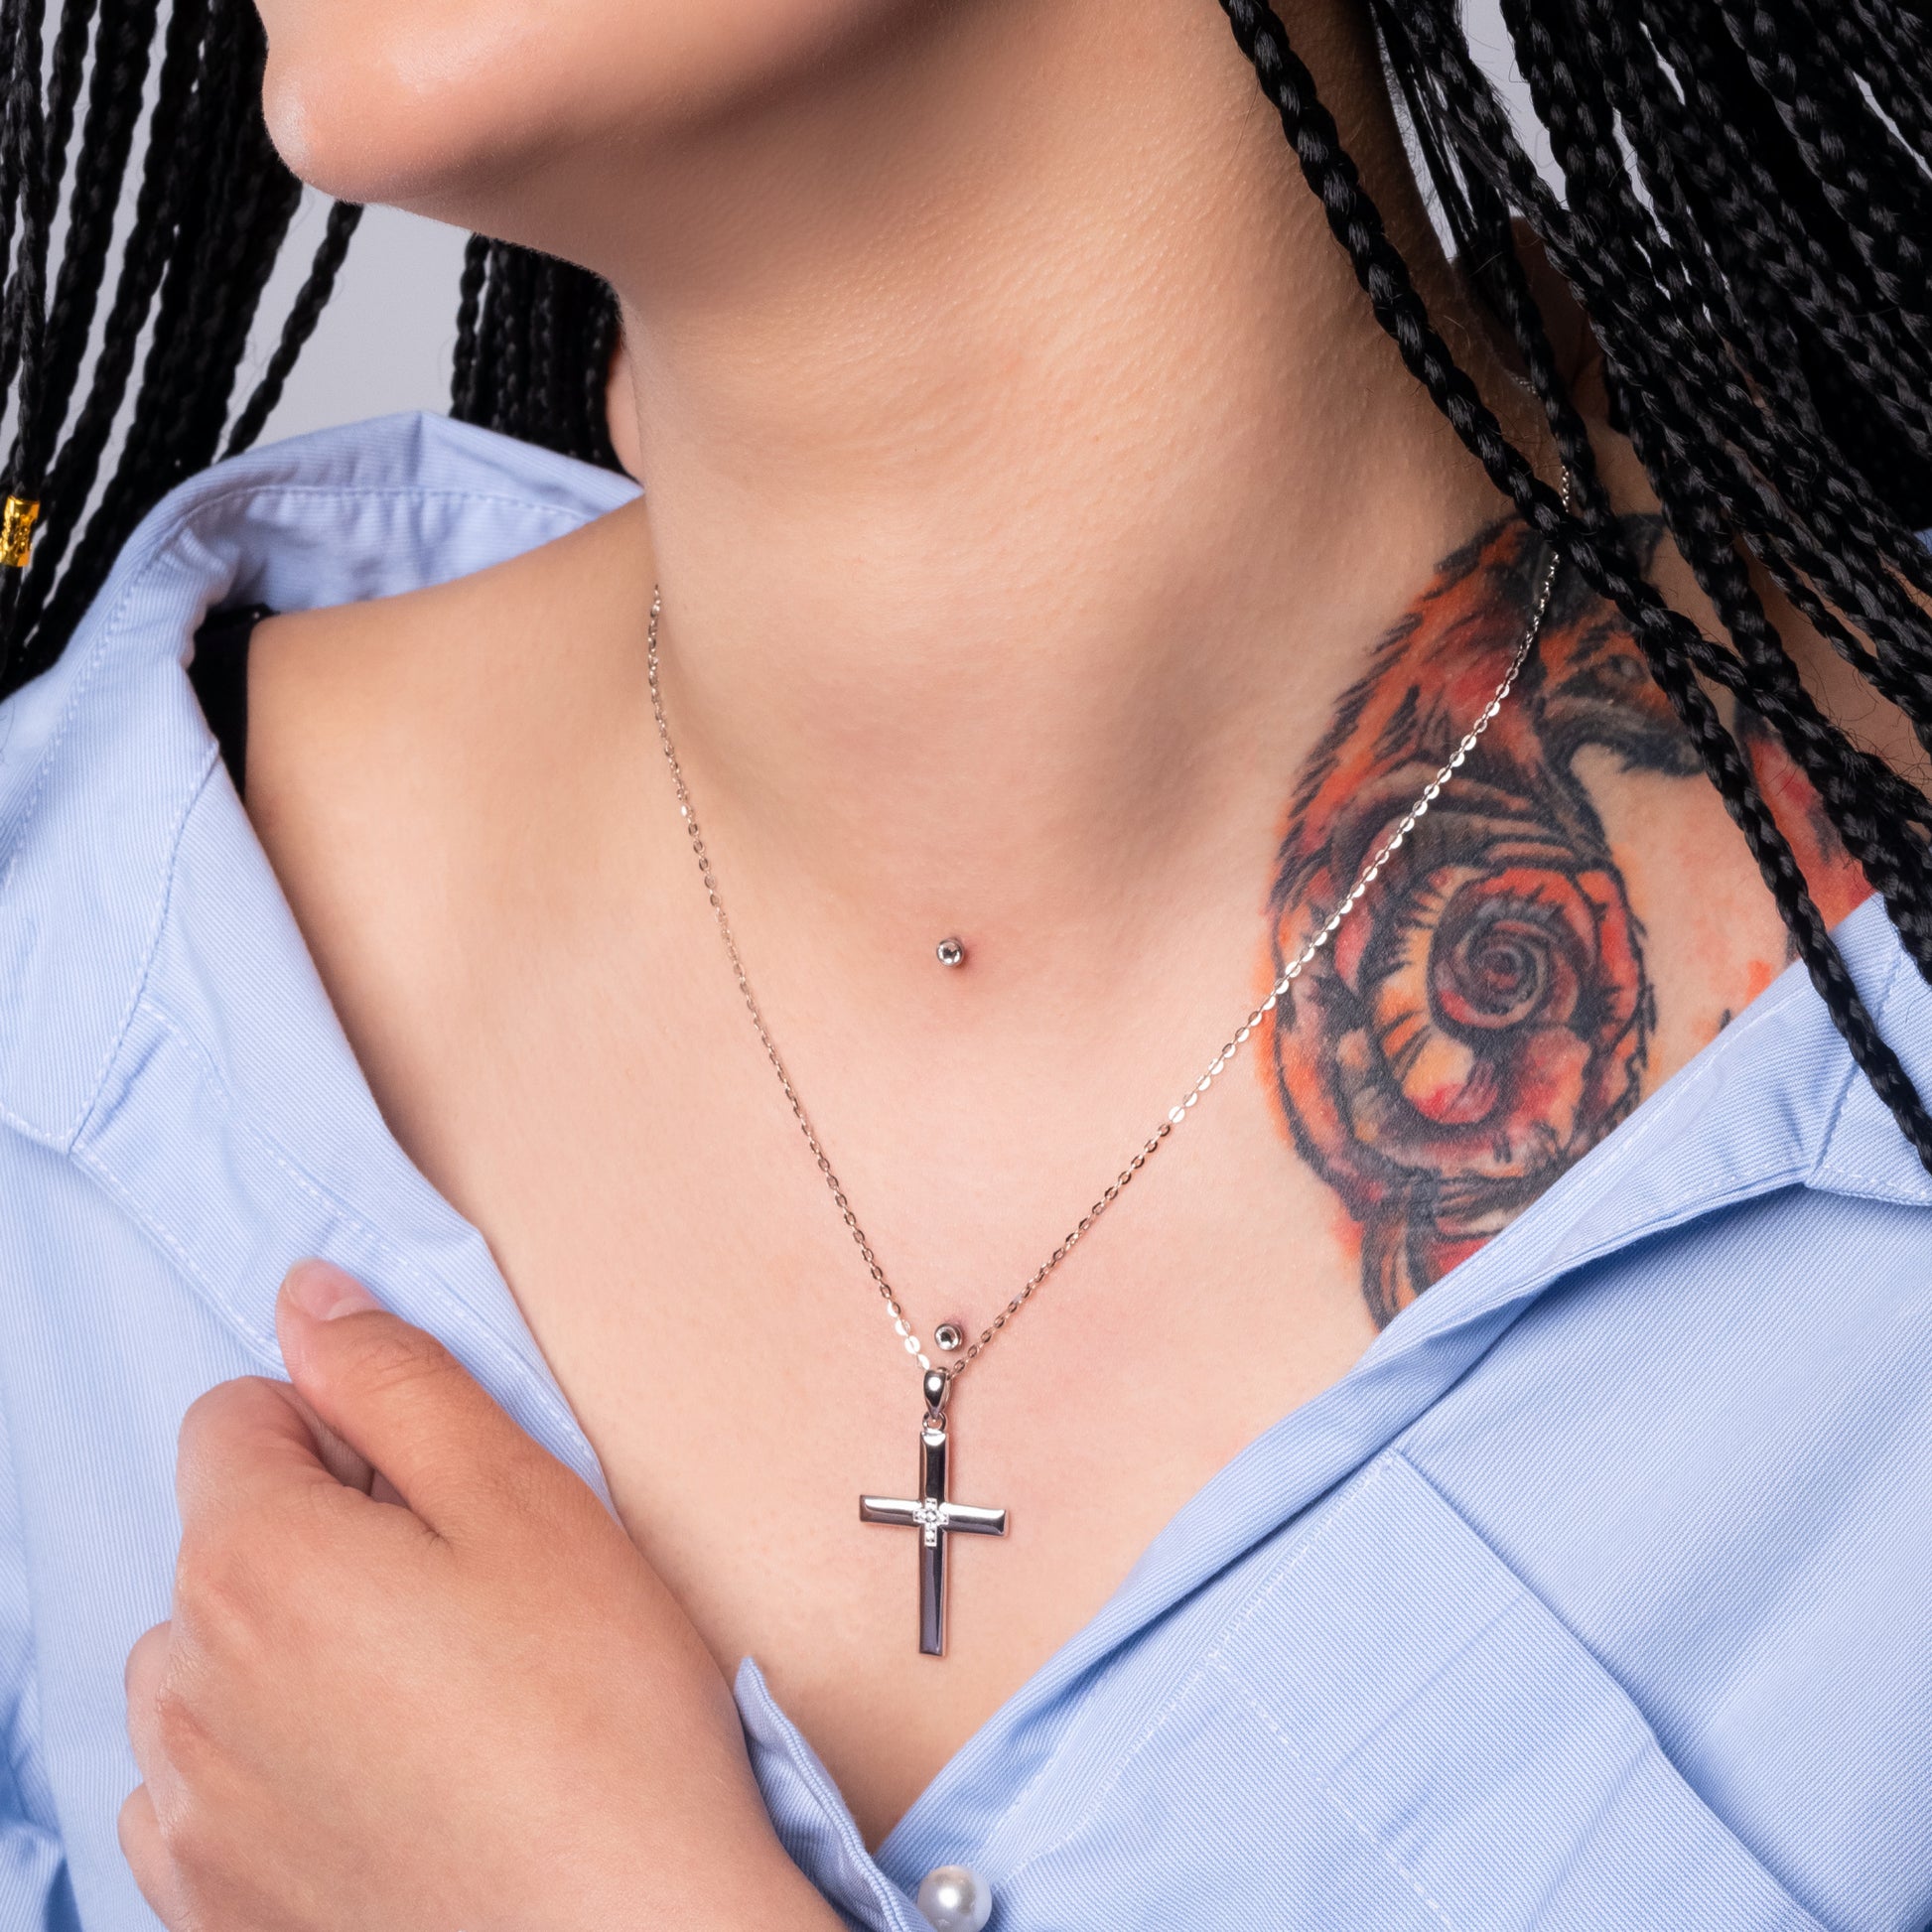 Model wearing Christian Cross Silver Pendant with Flat Cable necklace.